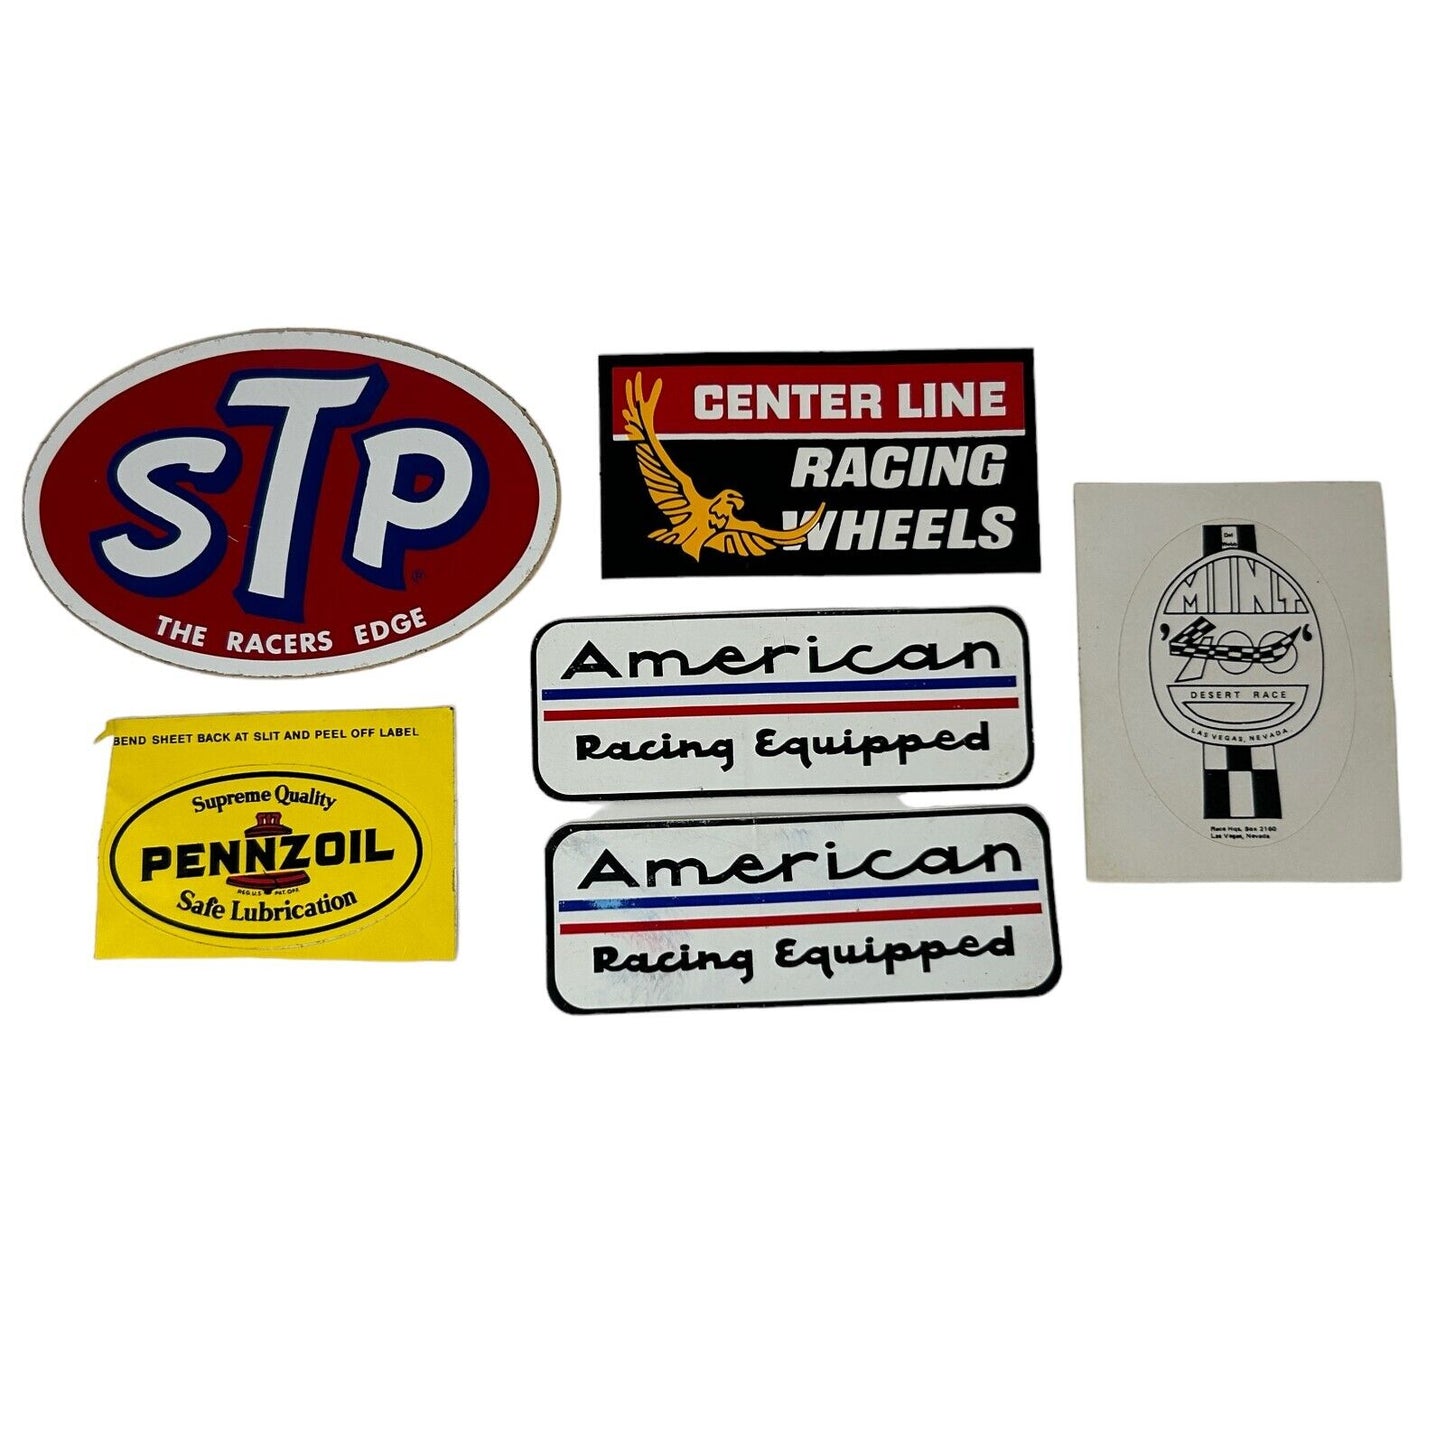 Lot of Auto Racing Vintage 60s 70s Stickers Motorsports Mint 400 STP Michelin